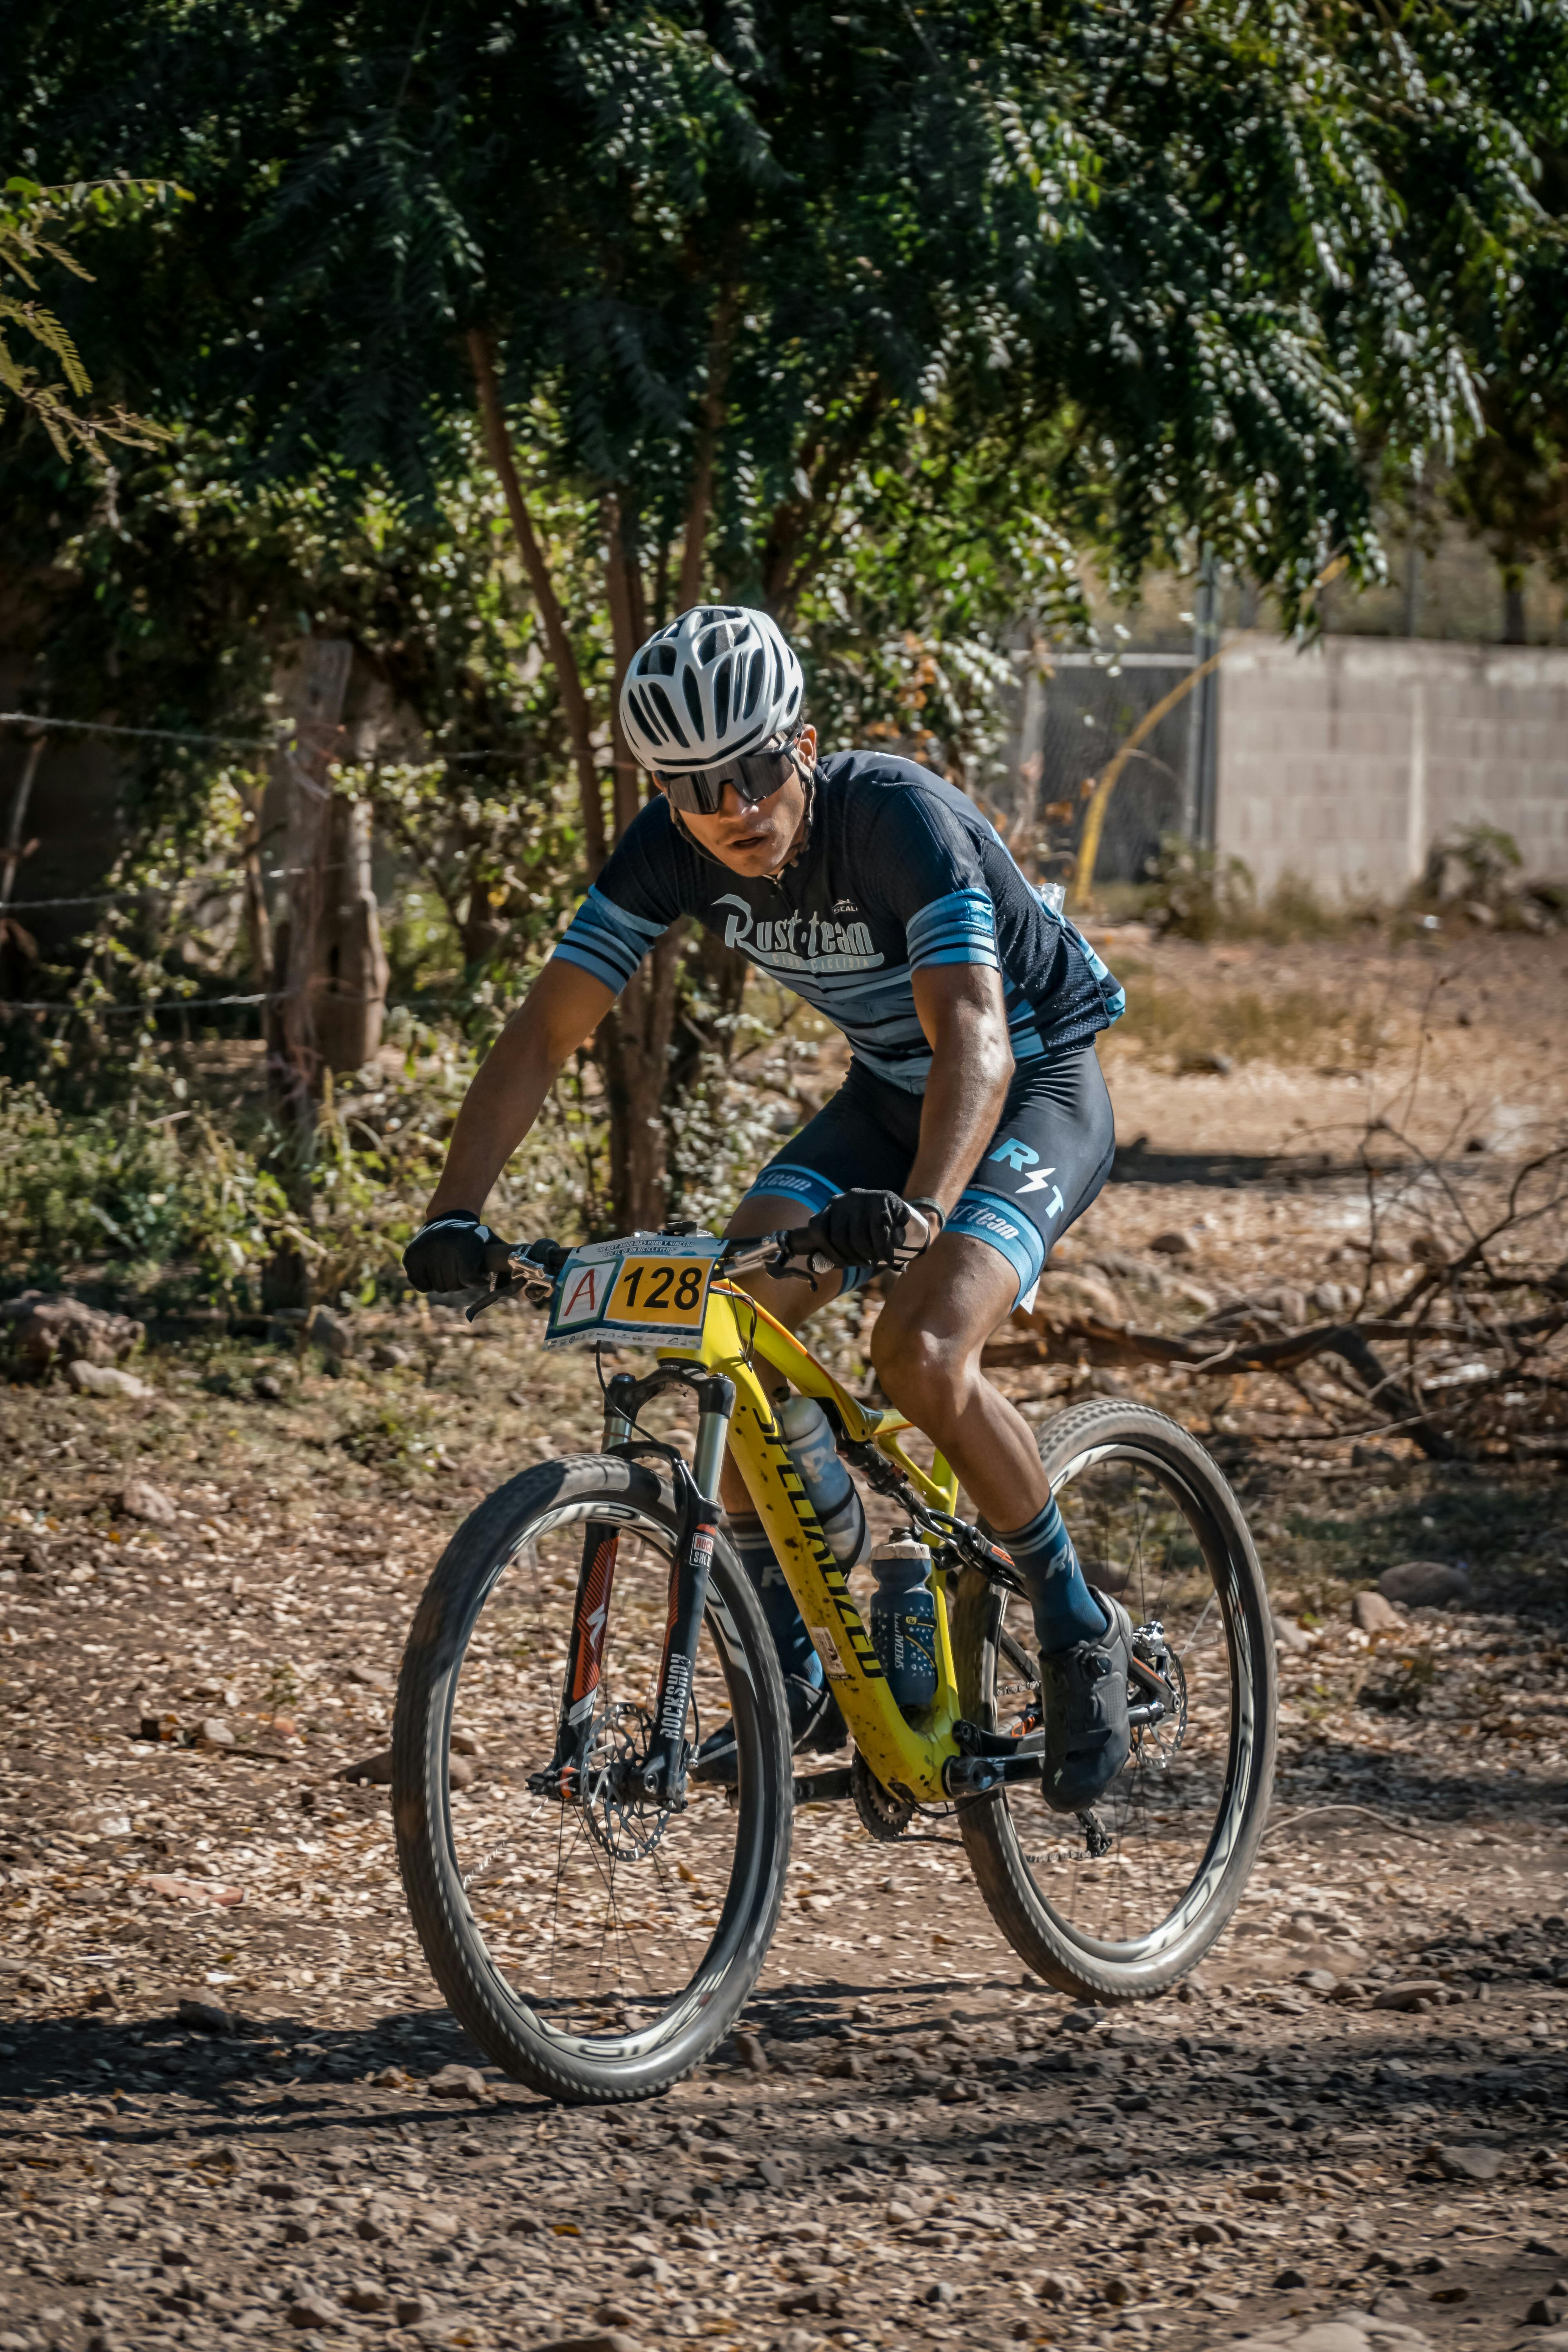 man in blue and black shirt riding on bicycle